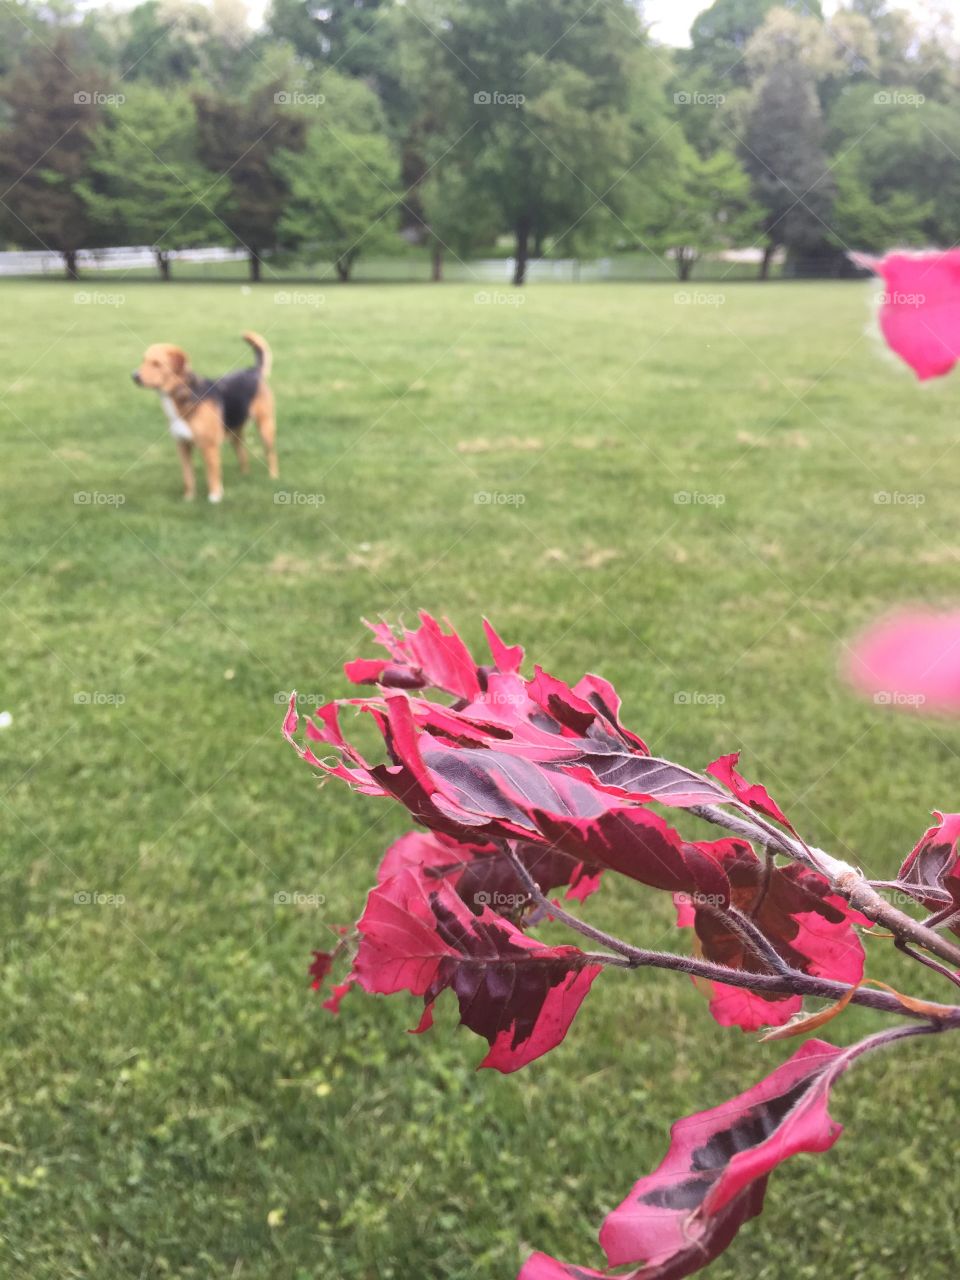 Beautiful morning dog. Morning with the dog next to a pink leafed dogwood